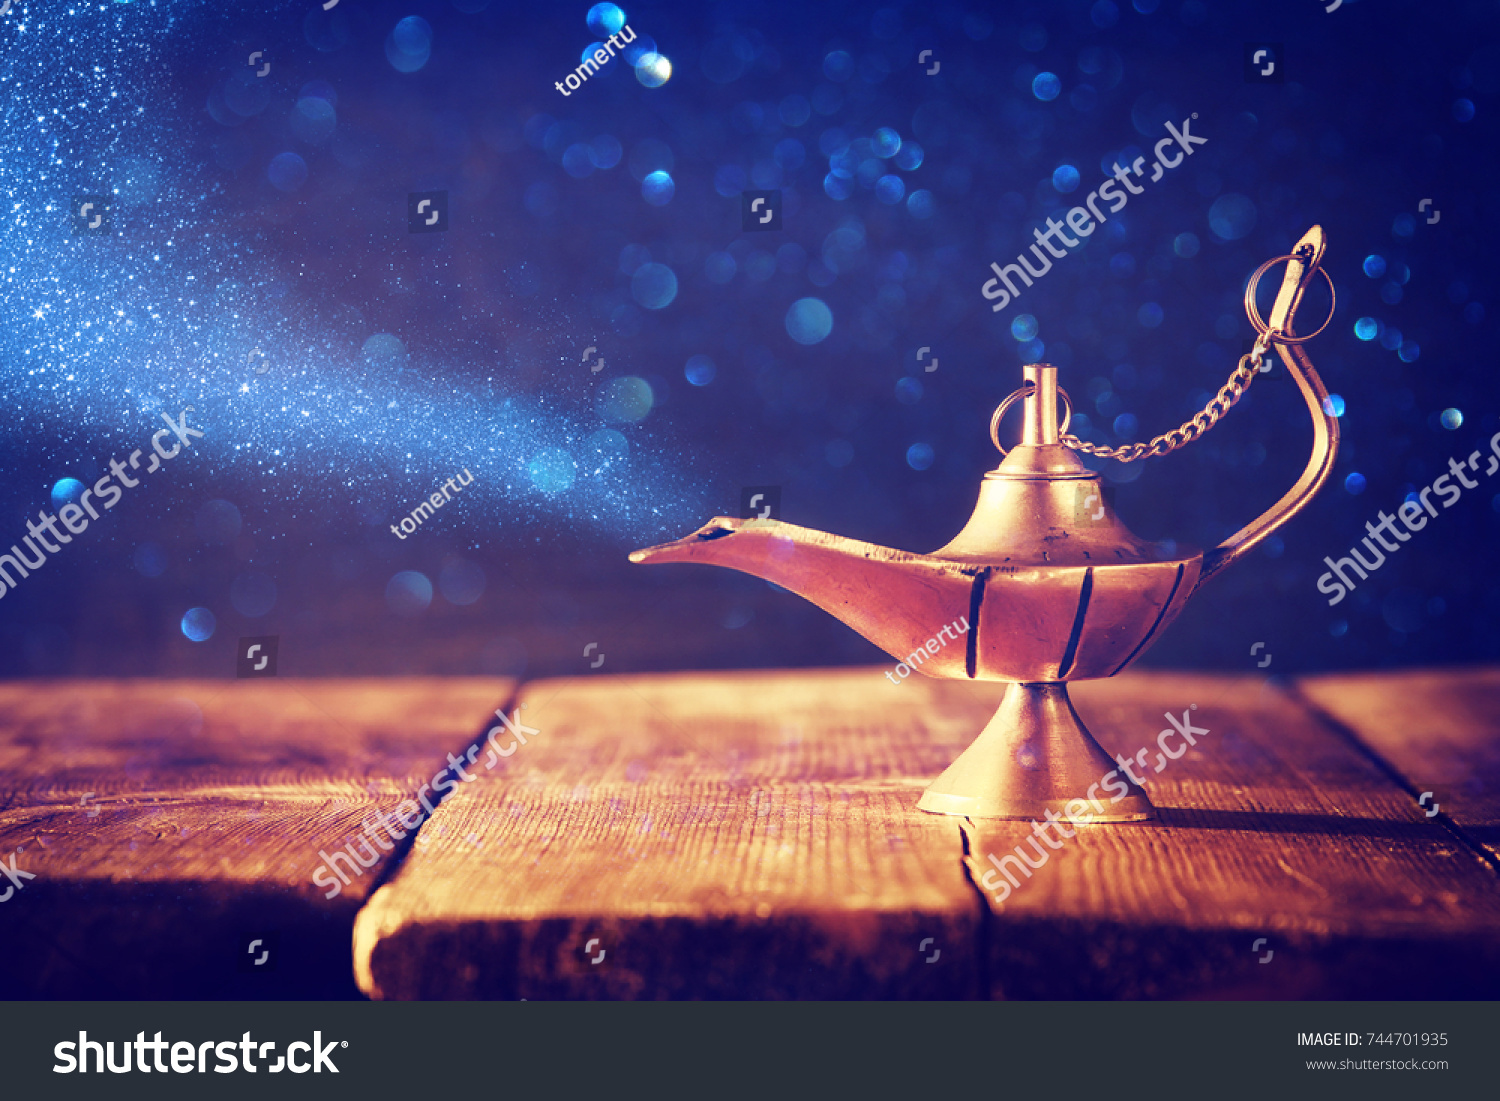 Image of magical aladdin lamp with glitter smoke. Lamp of wishes #744701935